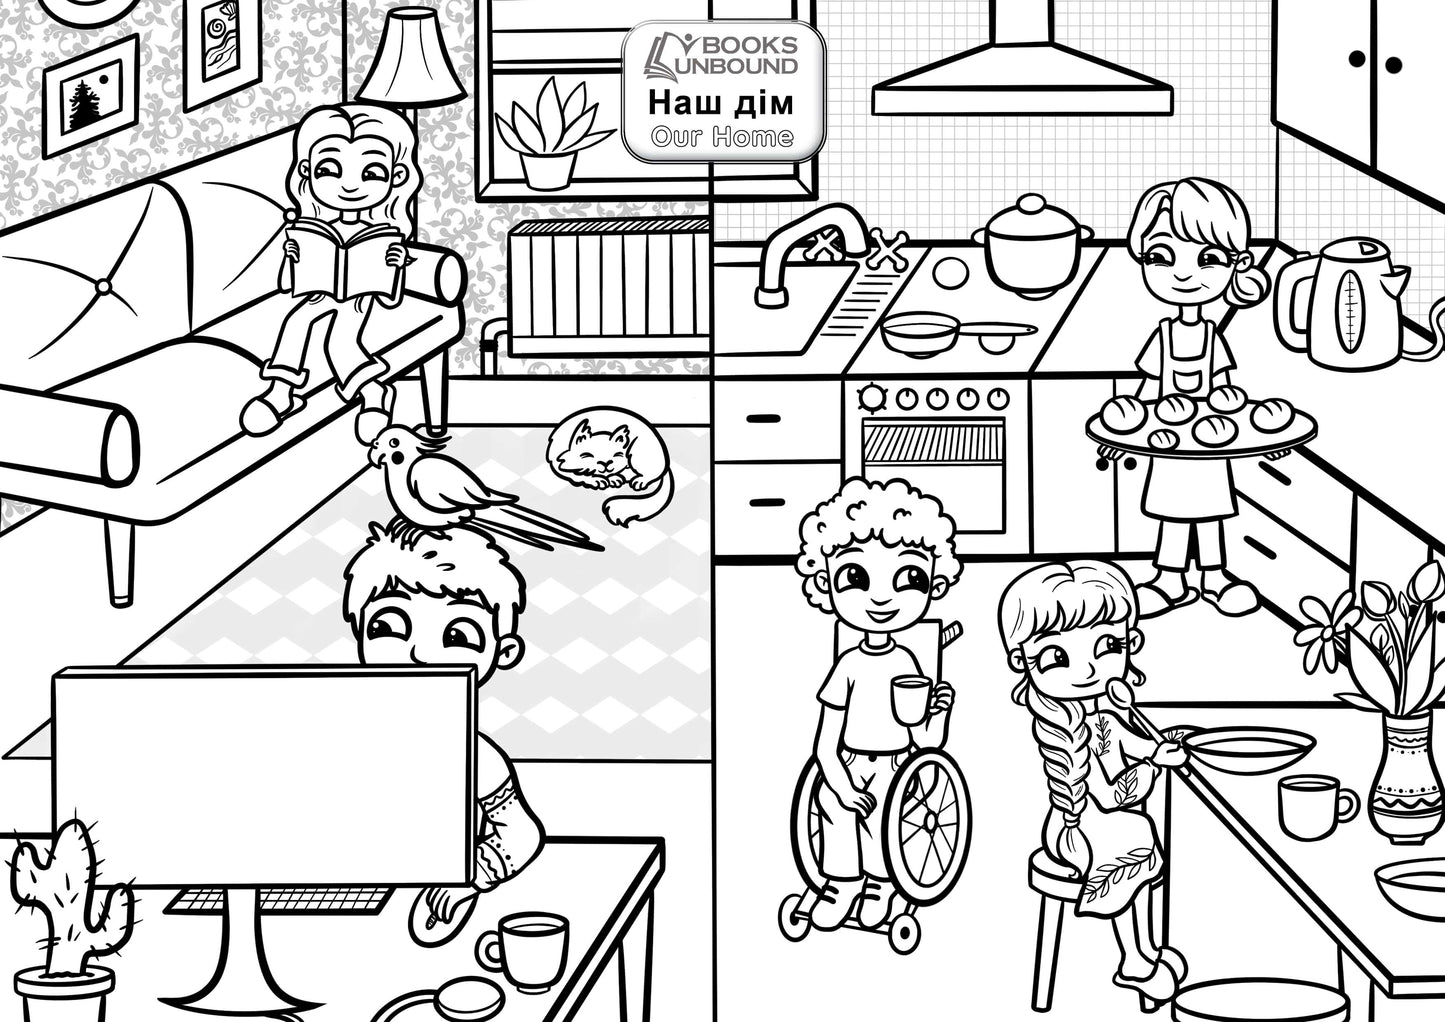 Coloring Page: Our Home